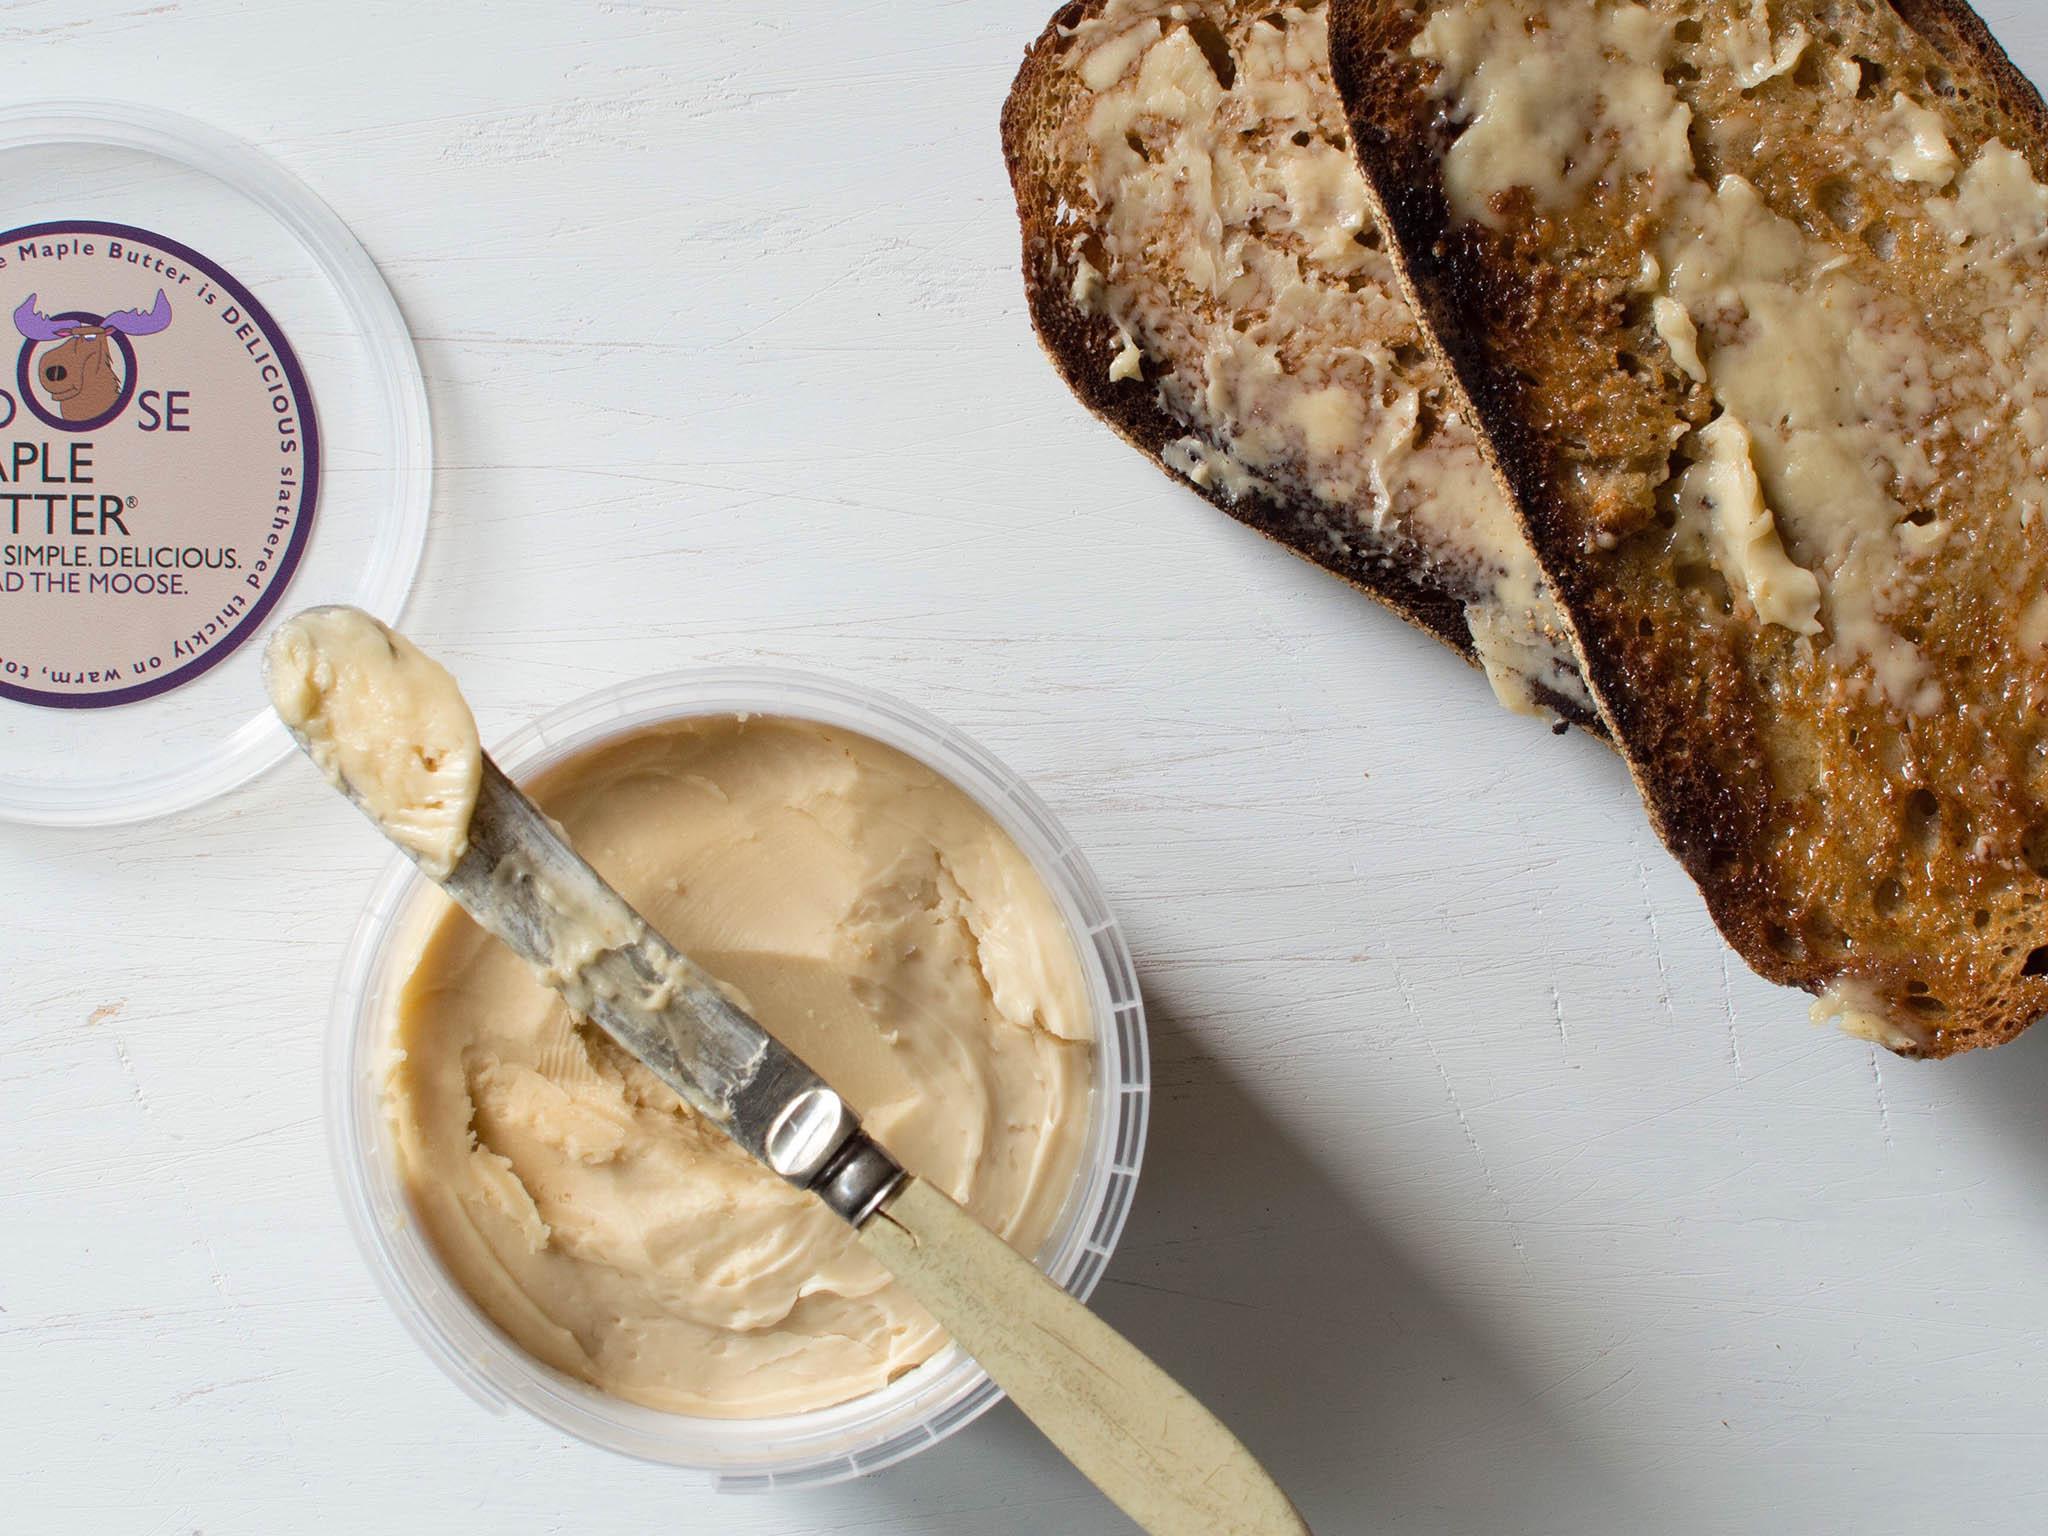 Moose Maple butter is beautifully creamy with a gratifying sweetness